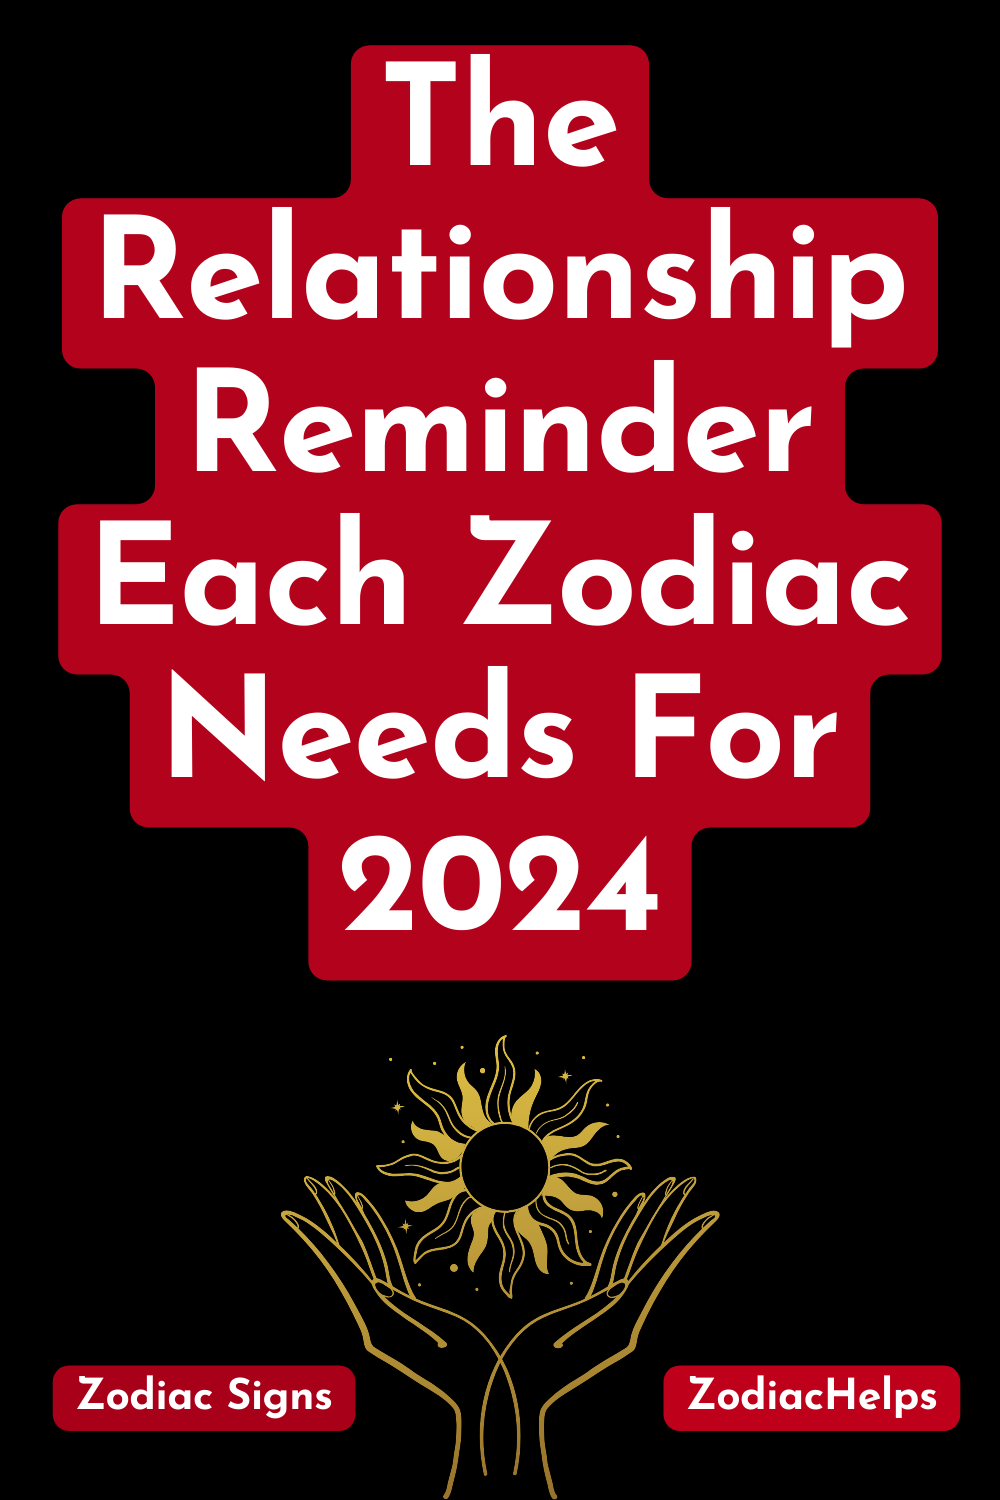 The Relationship Reminder Each Zodiac Needs For 2024